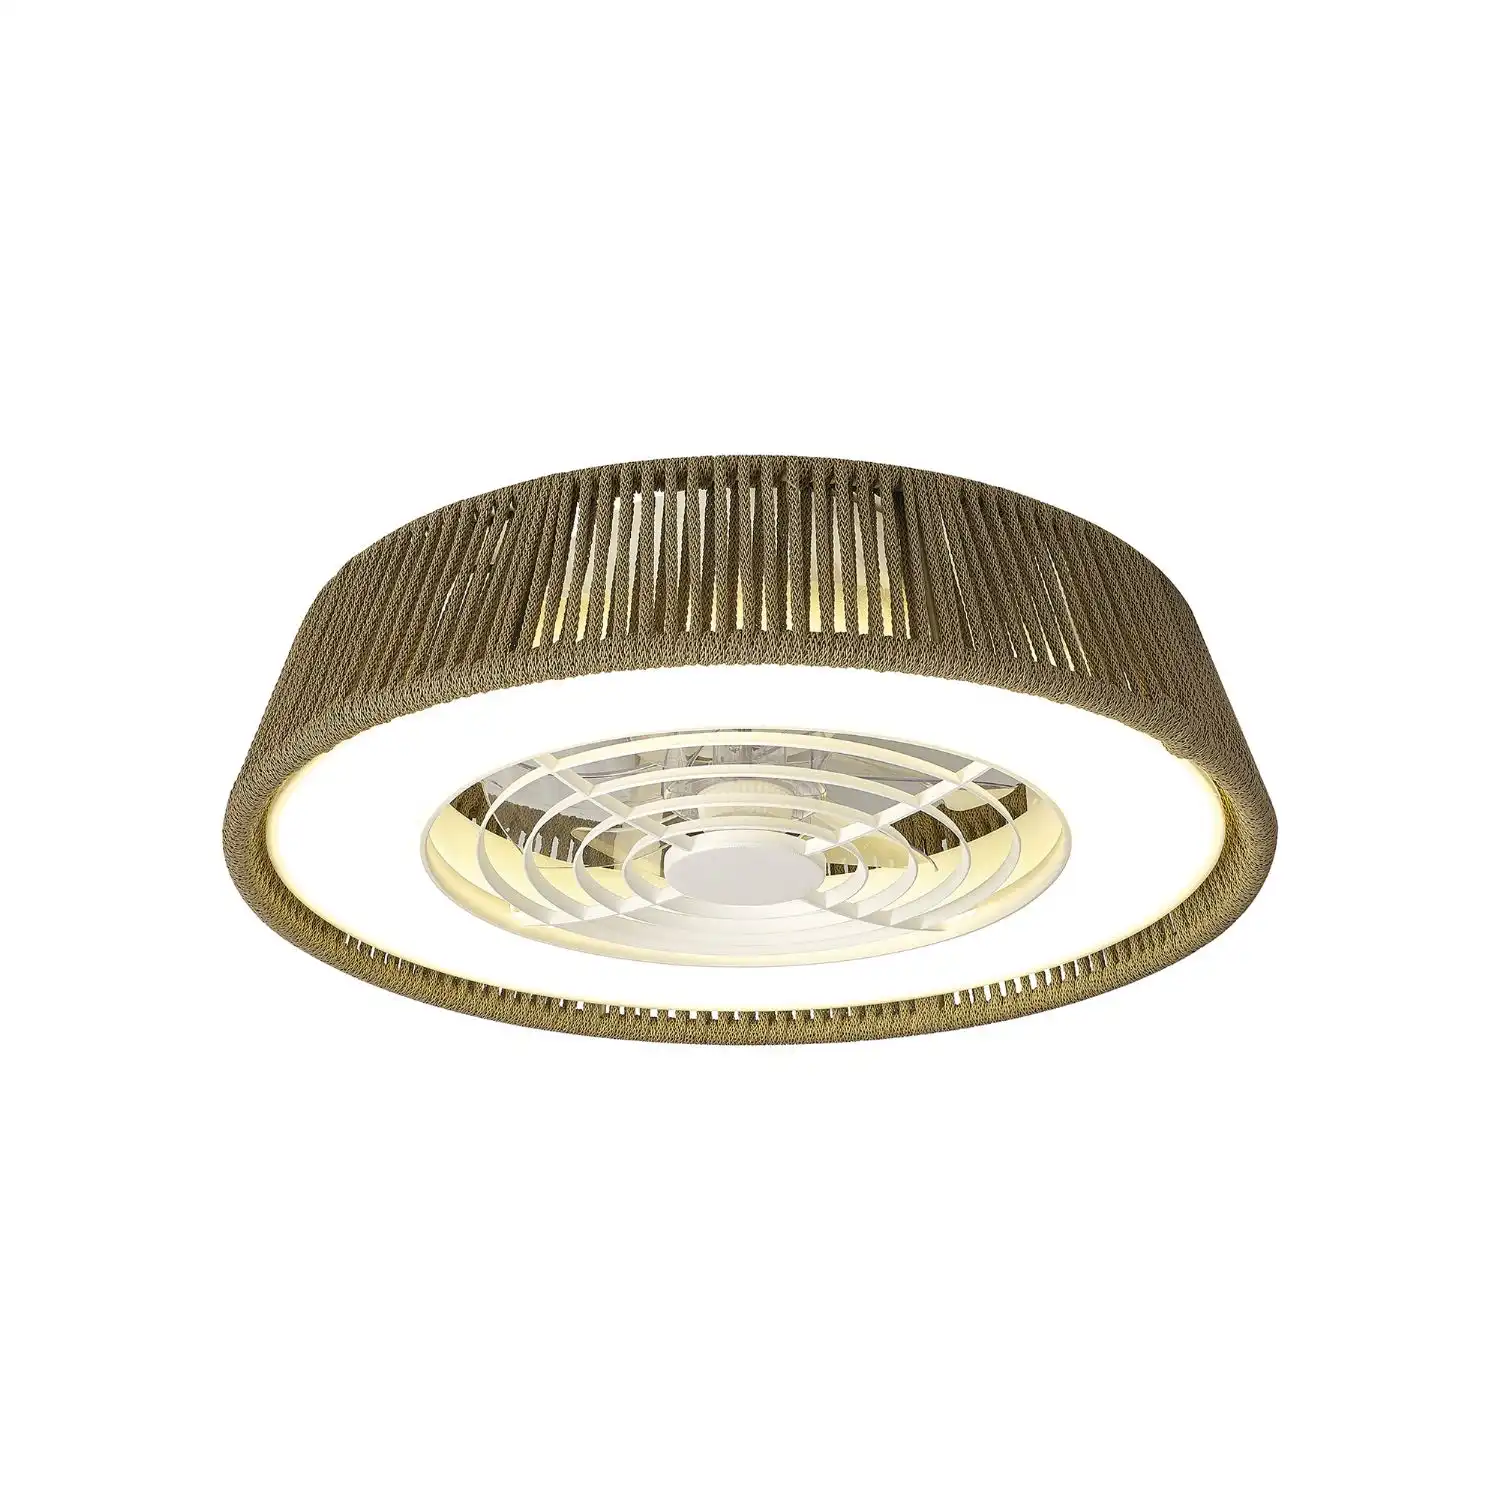 Polinesia Nautica Mini 55W LED Dimmable Ceiling Light With Built In 25W DC Reversible Fan, Beige Oscu, 3800lm, 5yrs Warranty